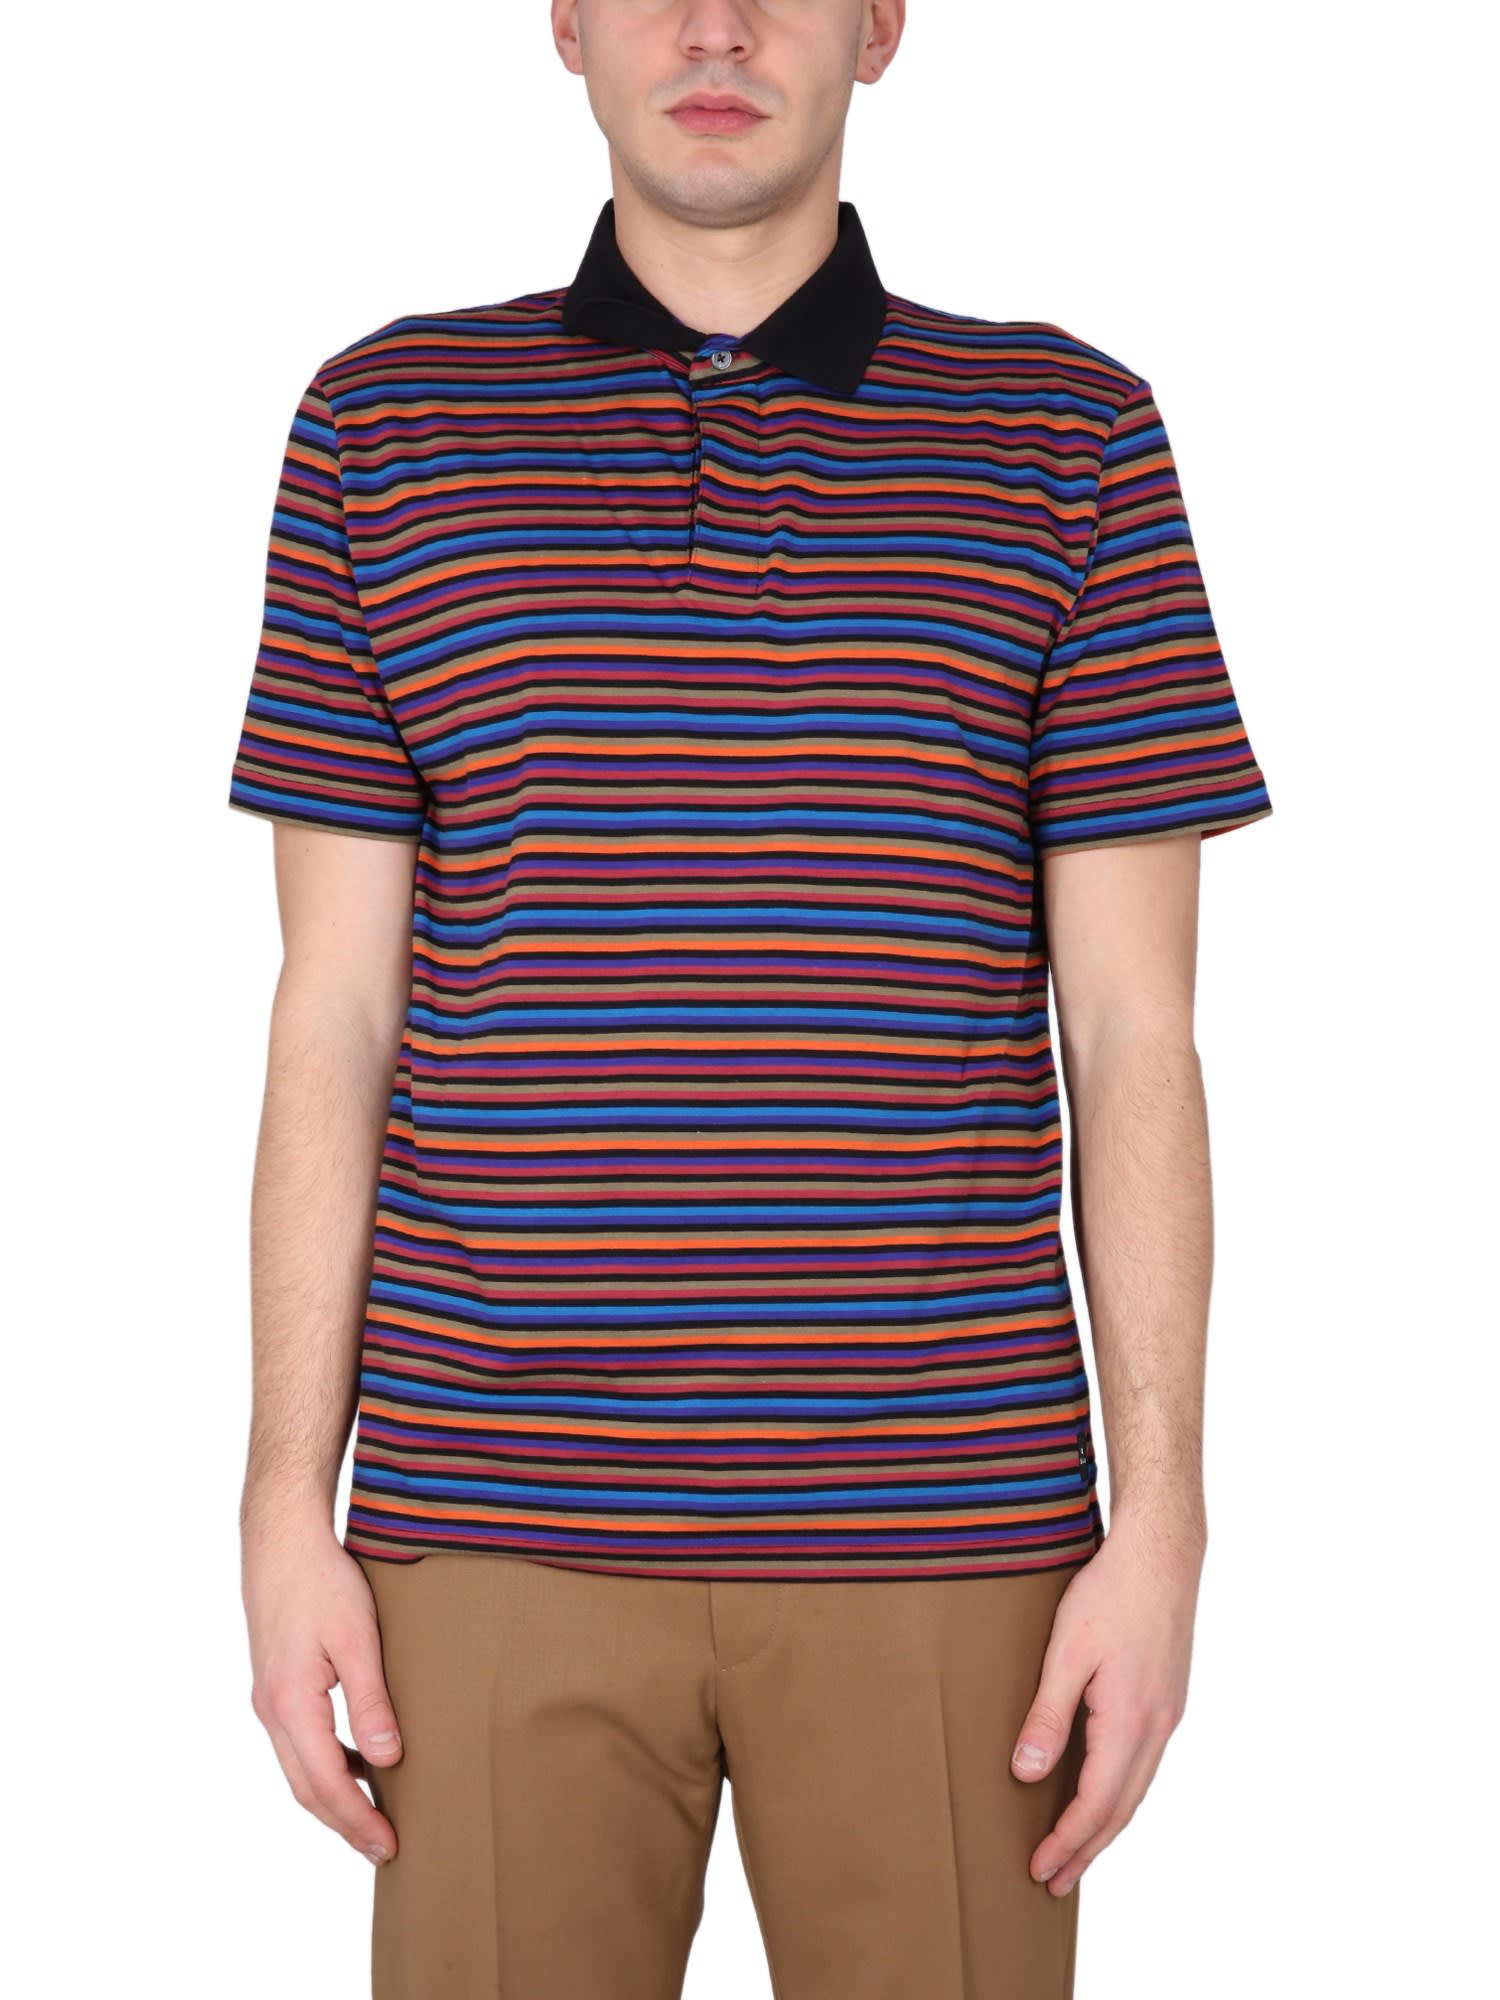 PS BY PAUL SMITH STRIPED POLO.